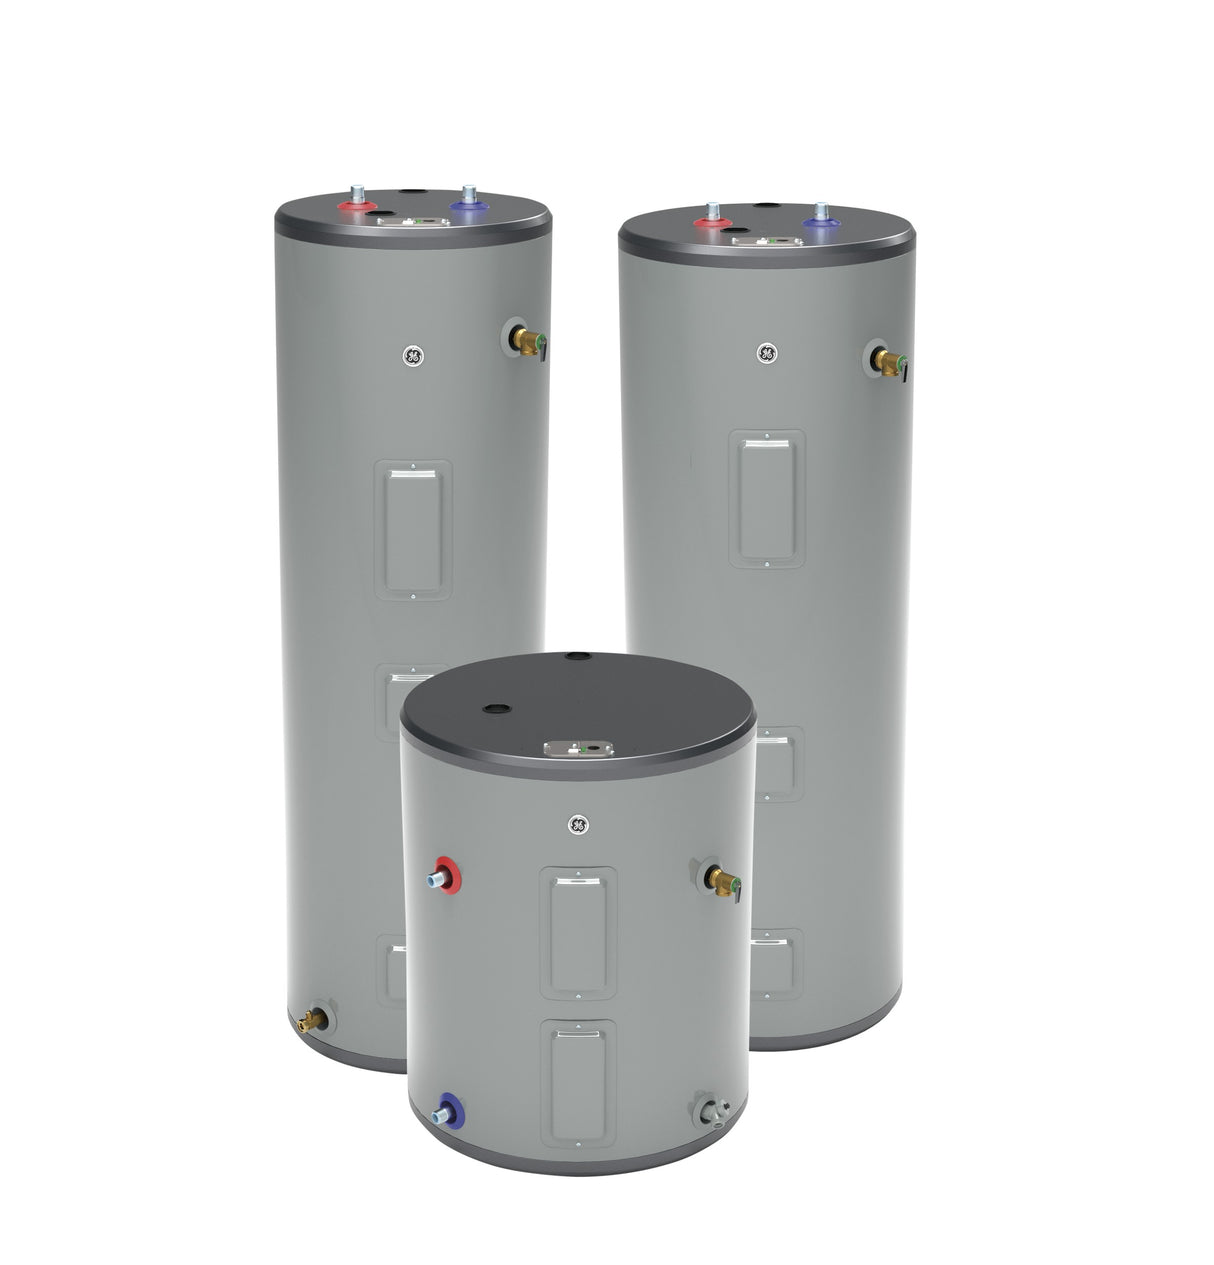 GE(R) 50 Gallon Short Electric Water Heater - (GE50S10BAM)